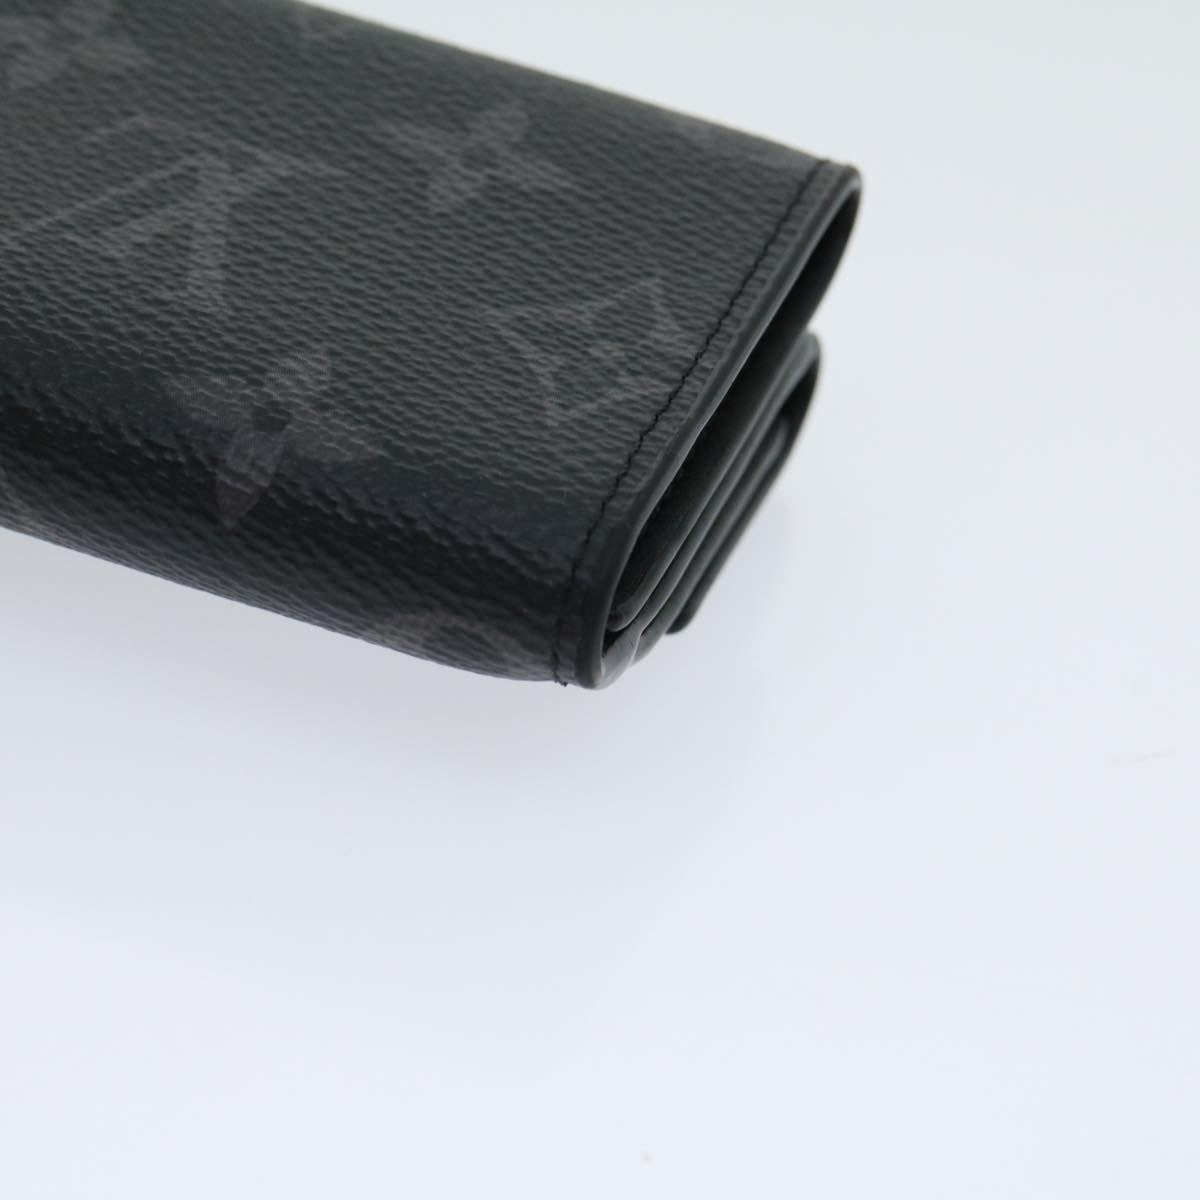 LOUISVUITTON Monogram Eclipse Reverse DiscoveryCompact Wallet M45417 Auth 30461A